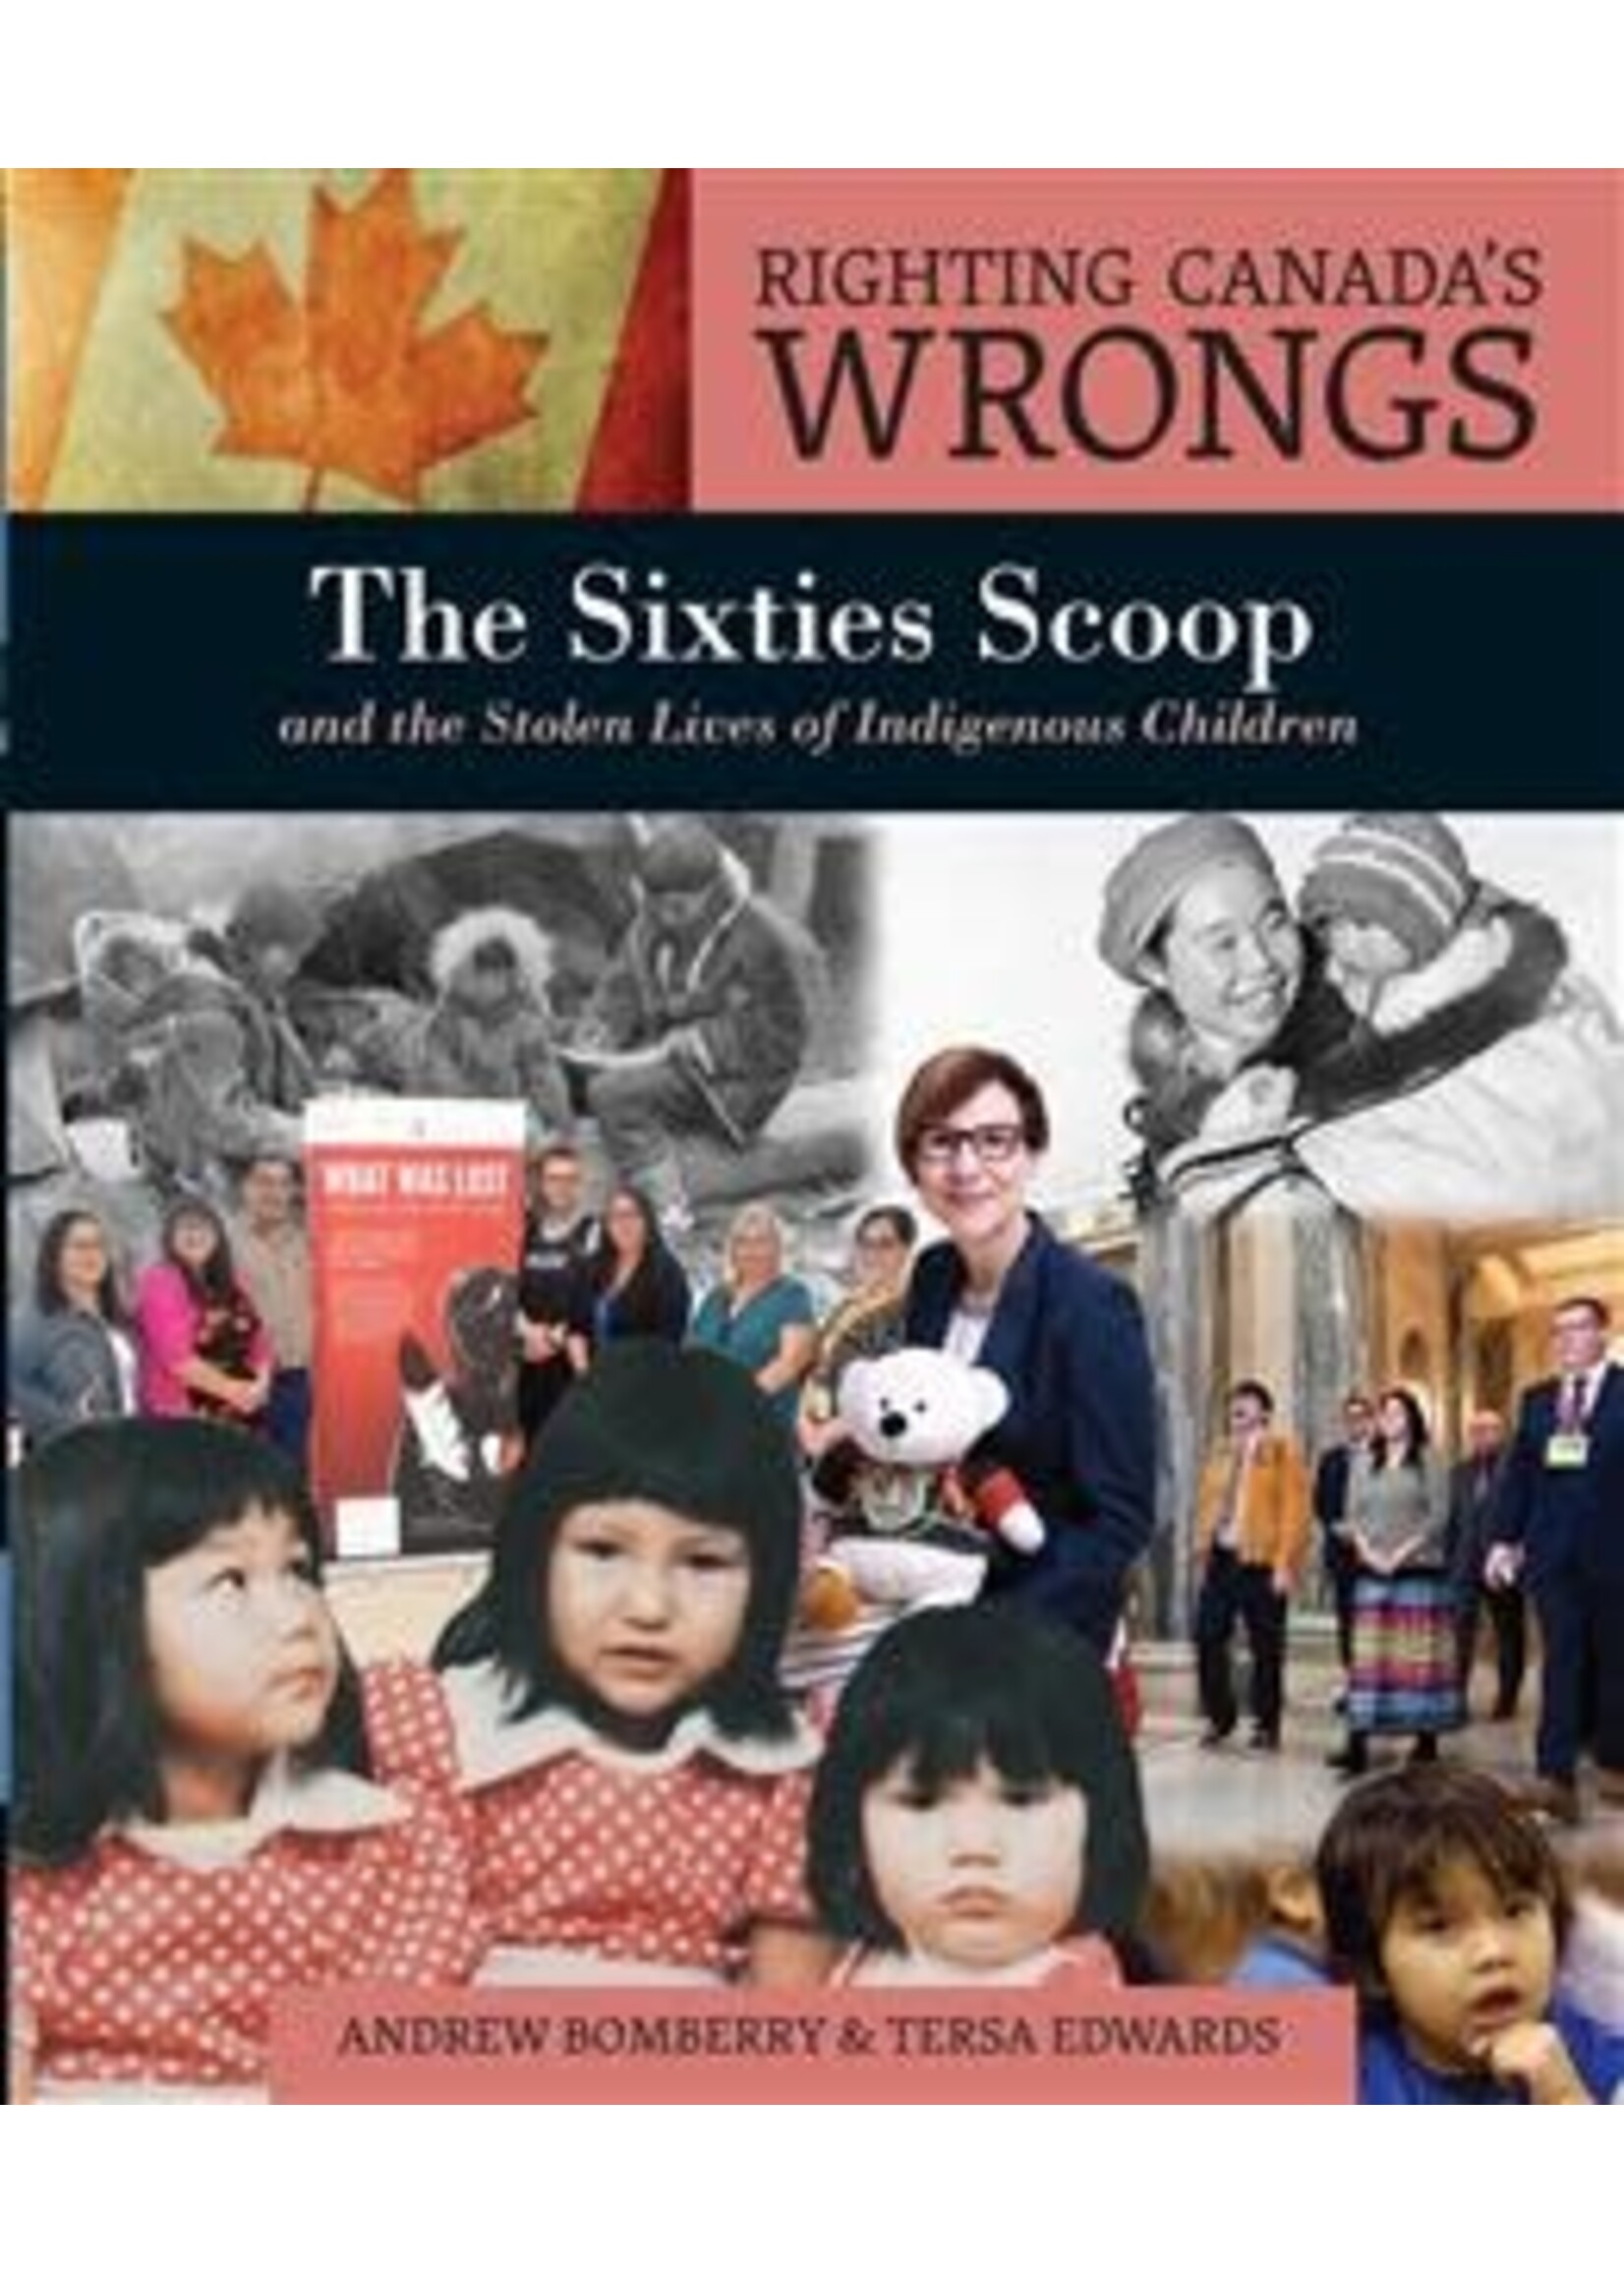 Righting Canada's Wrongs: The Sixties Scoop and the Stolen Lives of Indigenous Children, 1st ed. by Andrew Bomberry, Teresa Edwards